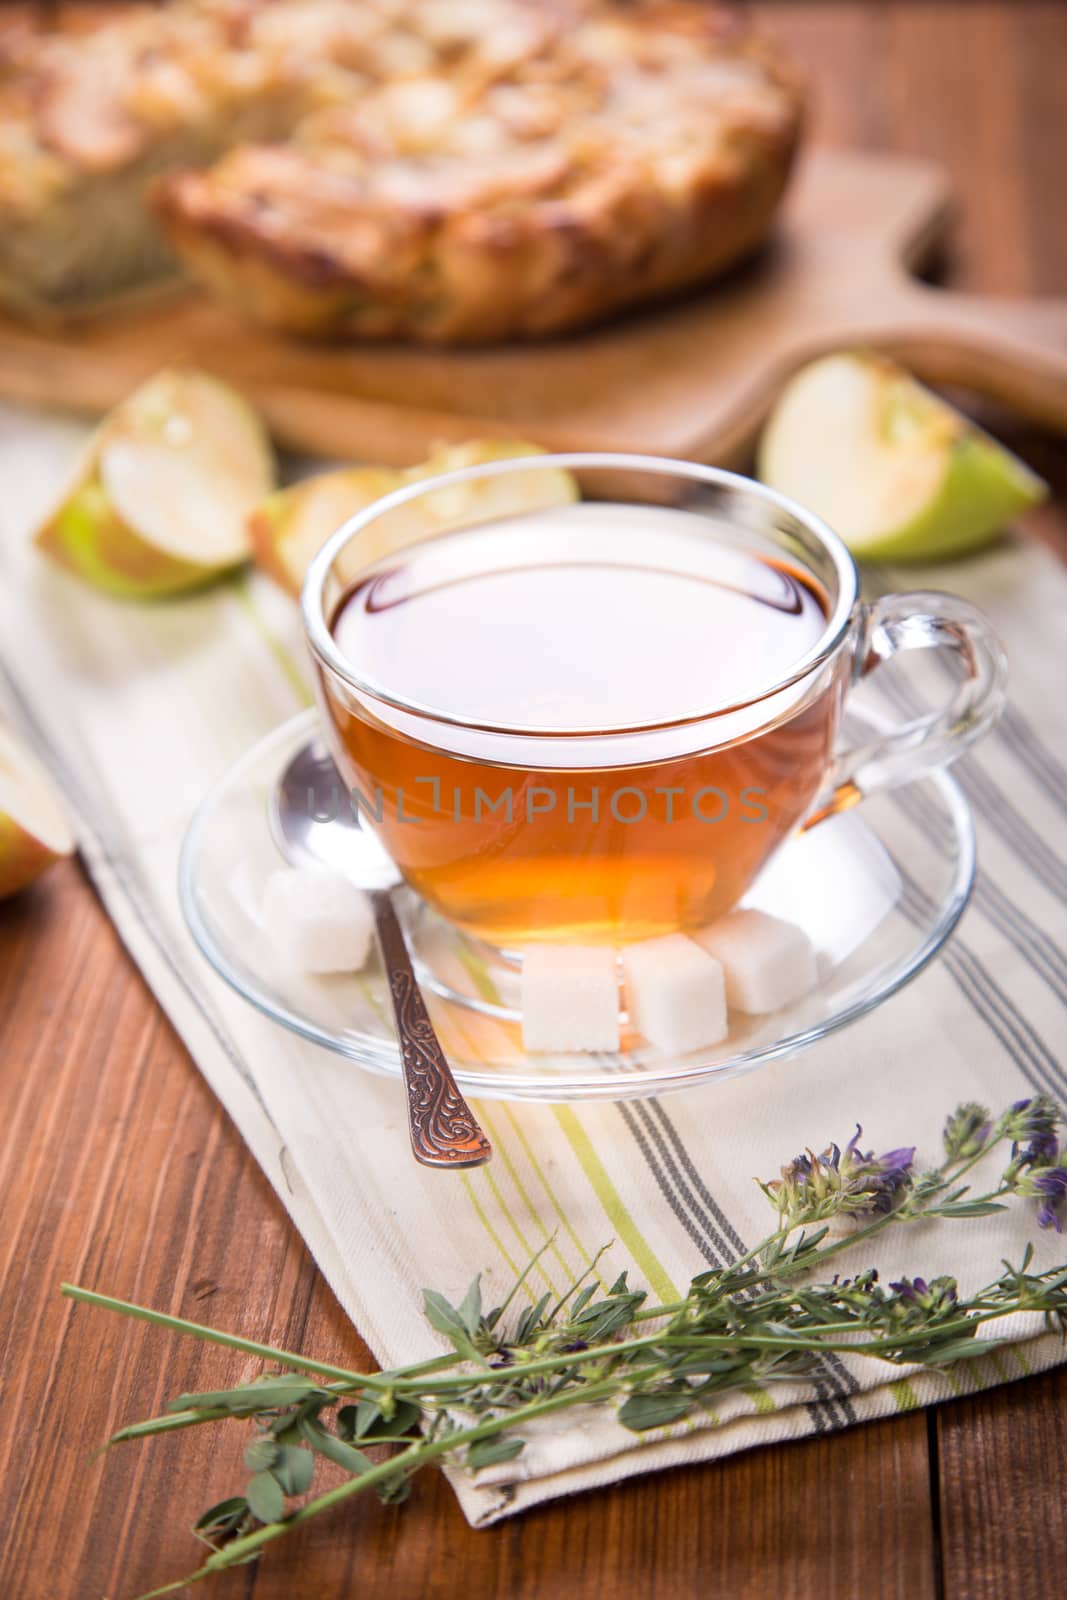  cup of tea,apple pie, with an cut piece on wooden background